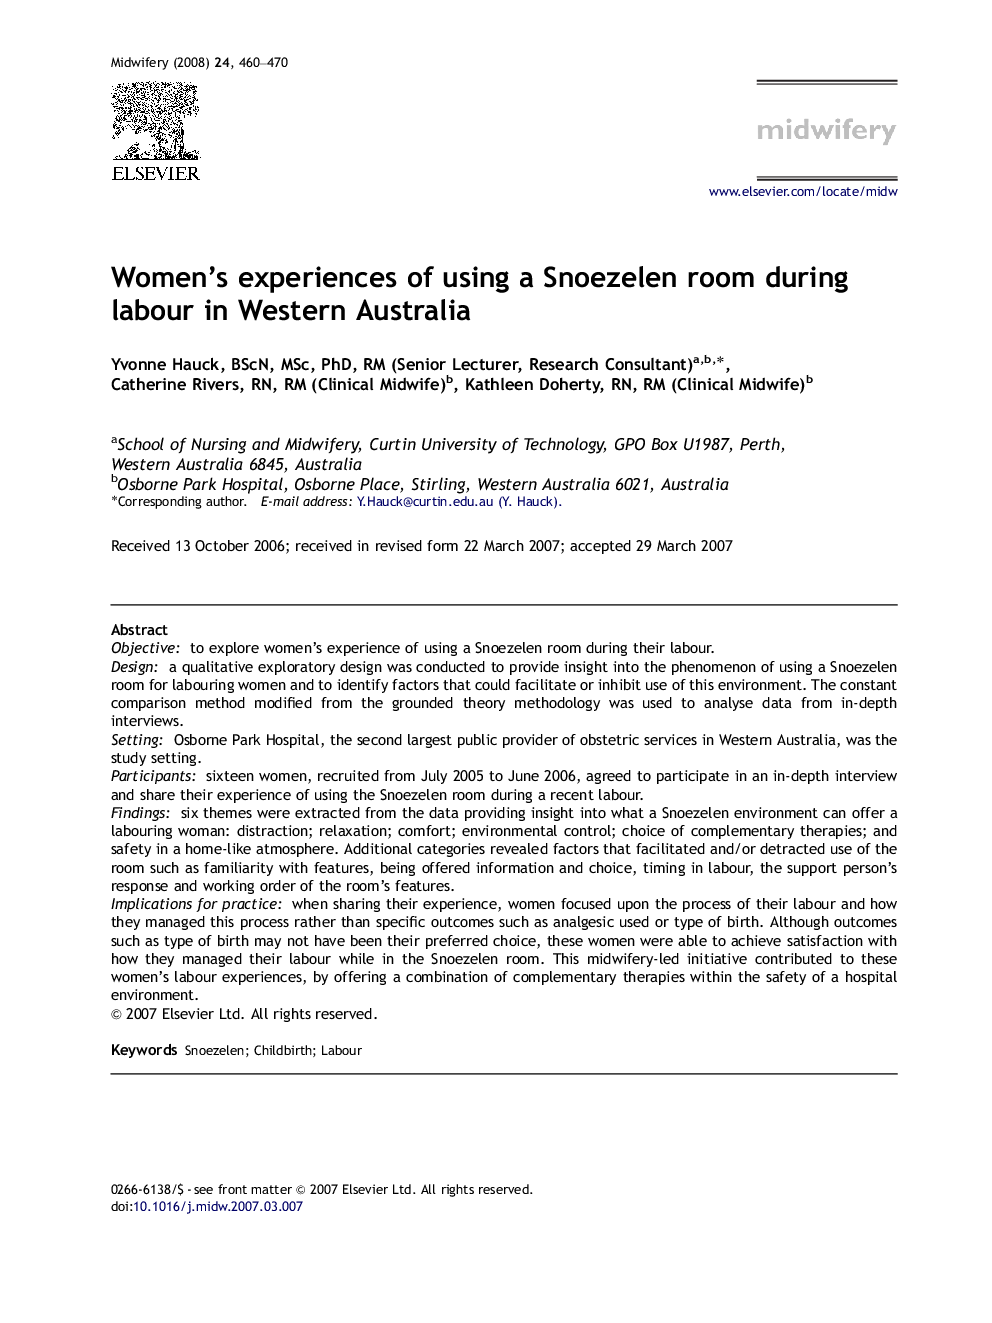 Women's experiences of using a Snoezelen room during labour in Western Australia